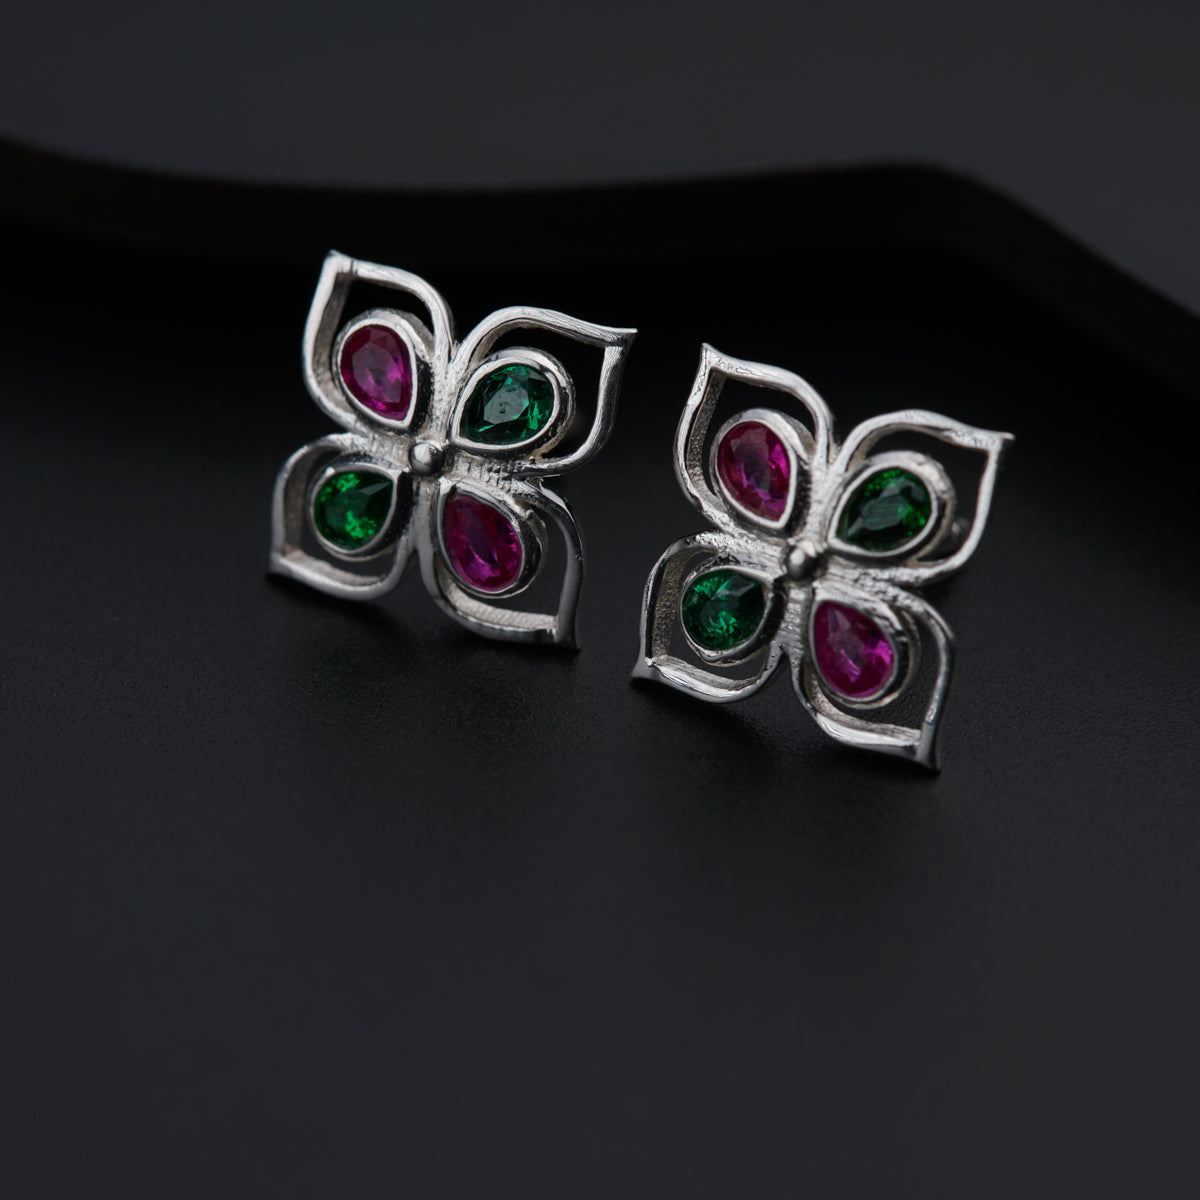 a pair of earrings with green and red stones